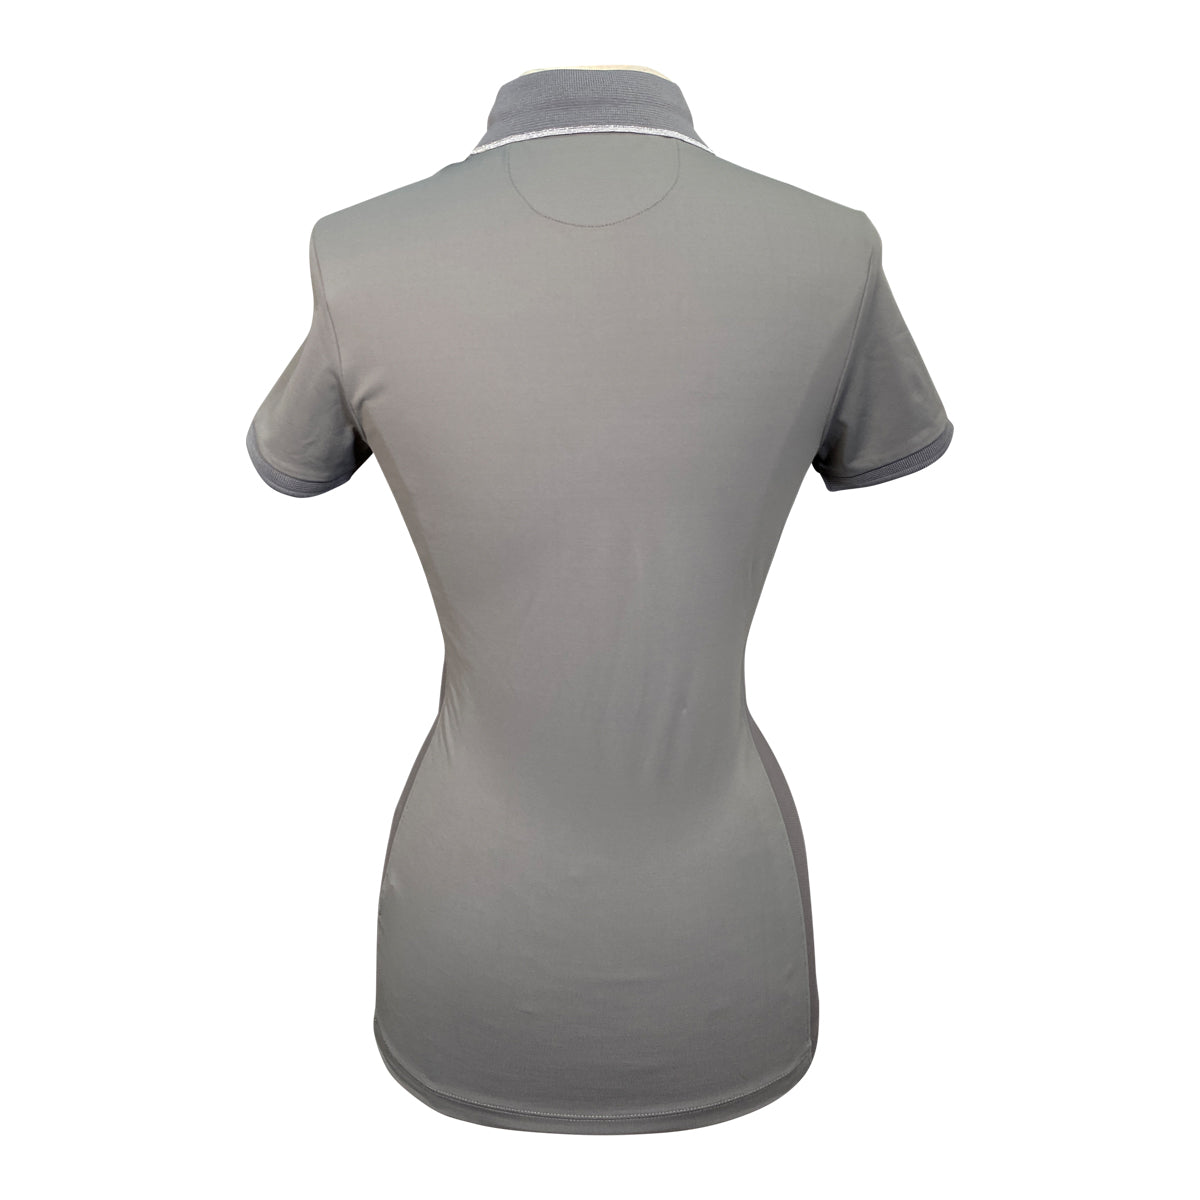 Equiline 'Ellae' Polo Shirt in Frost Grey